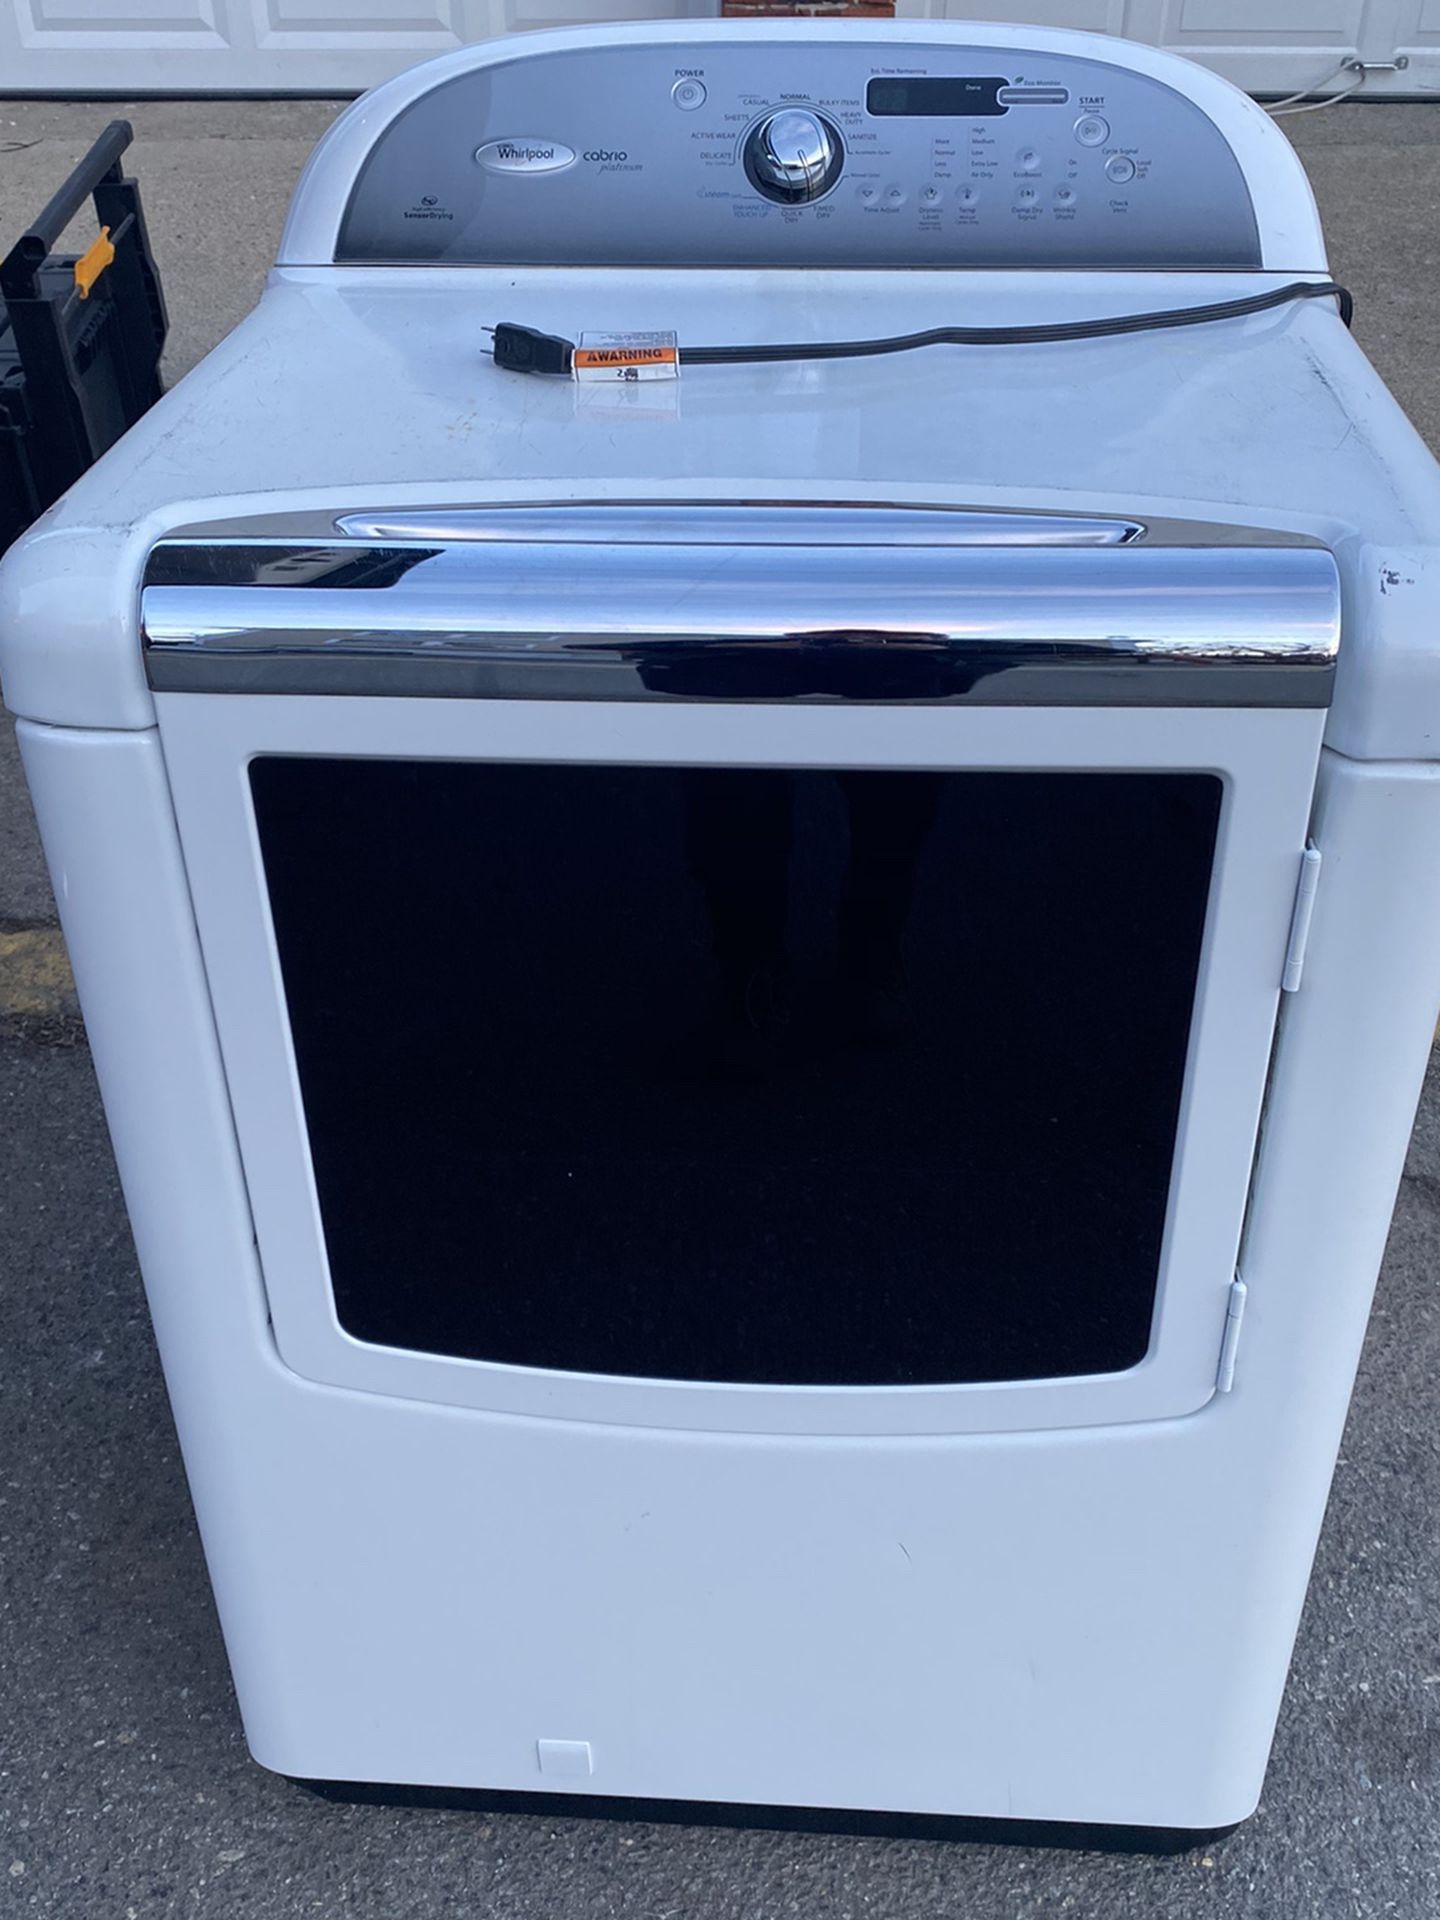 Gas dryer delivery available for a fee curbside drop off